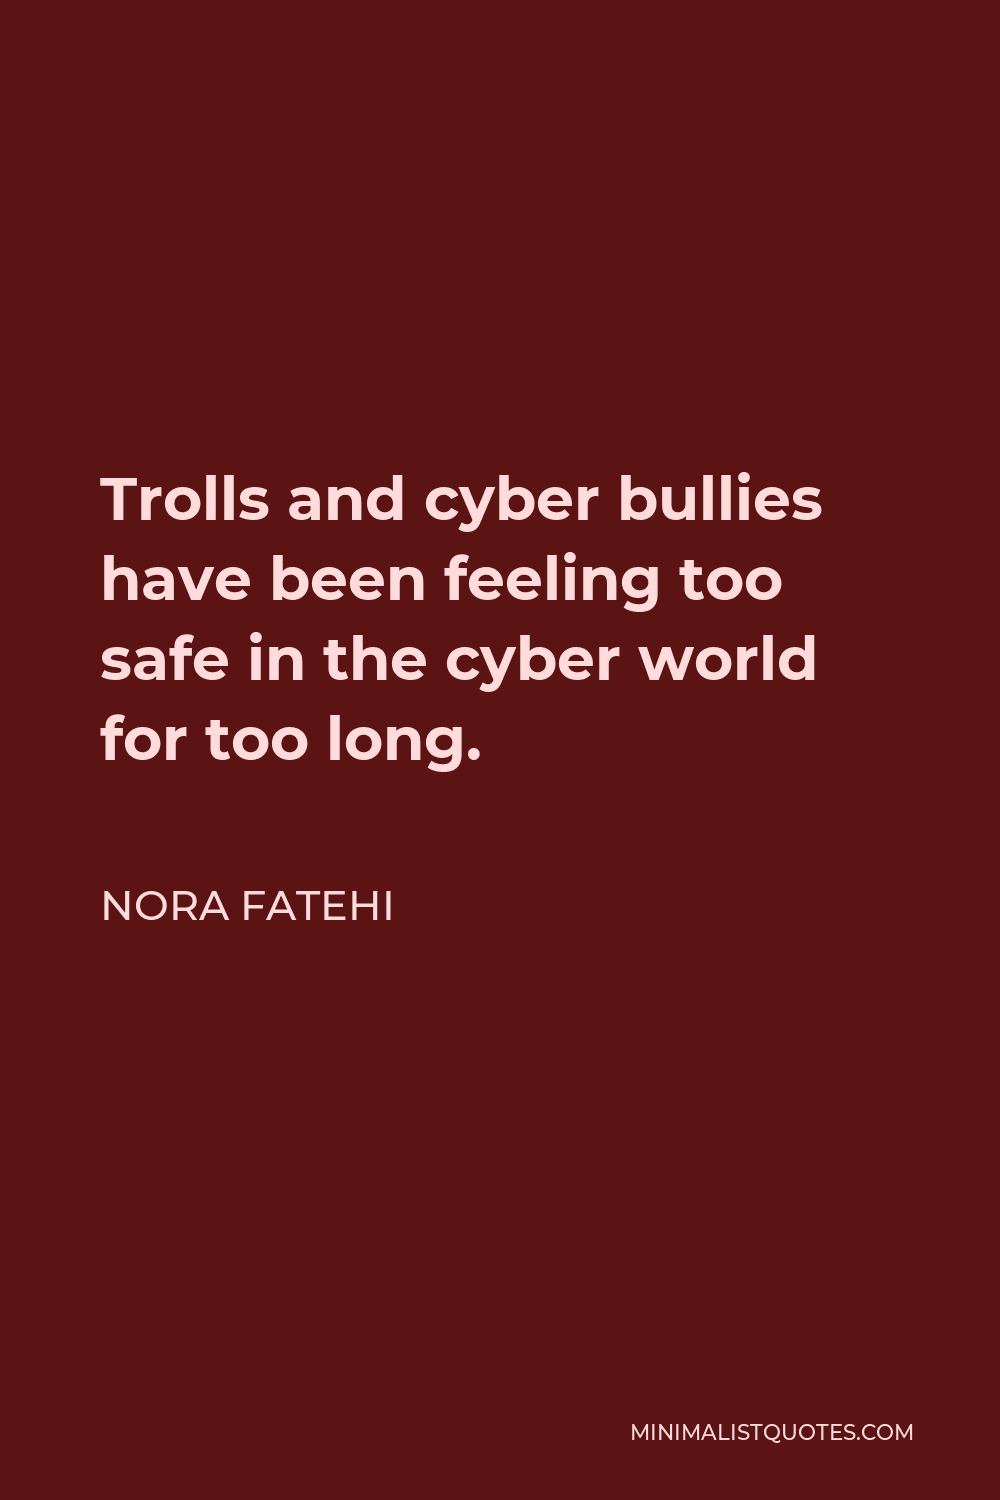 Nora Fatehi Quote - Trolls and cyber bullies have been feeling too safe in the cyber world for too long.